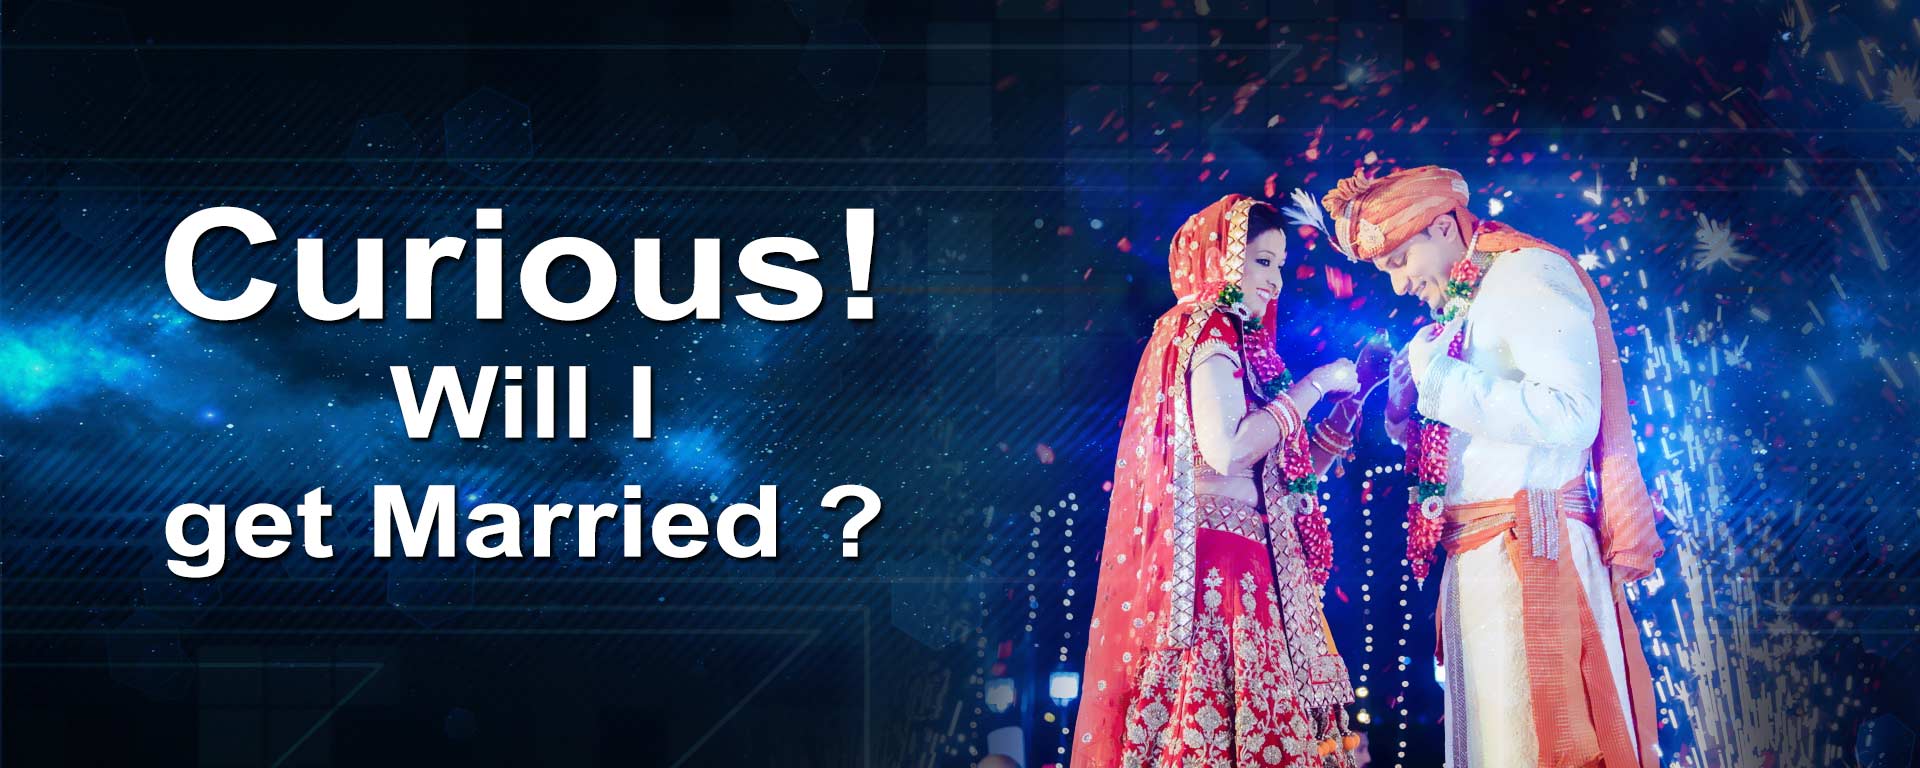 Curious! will get Married ?